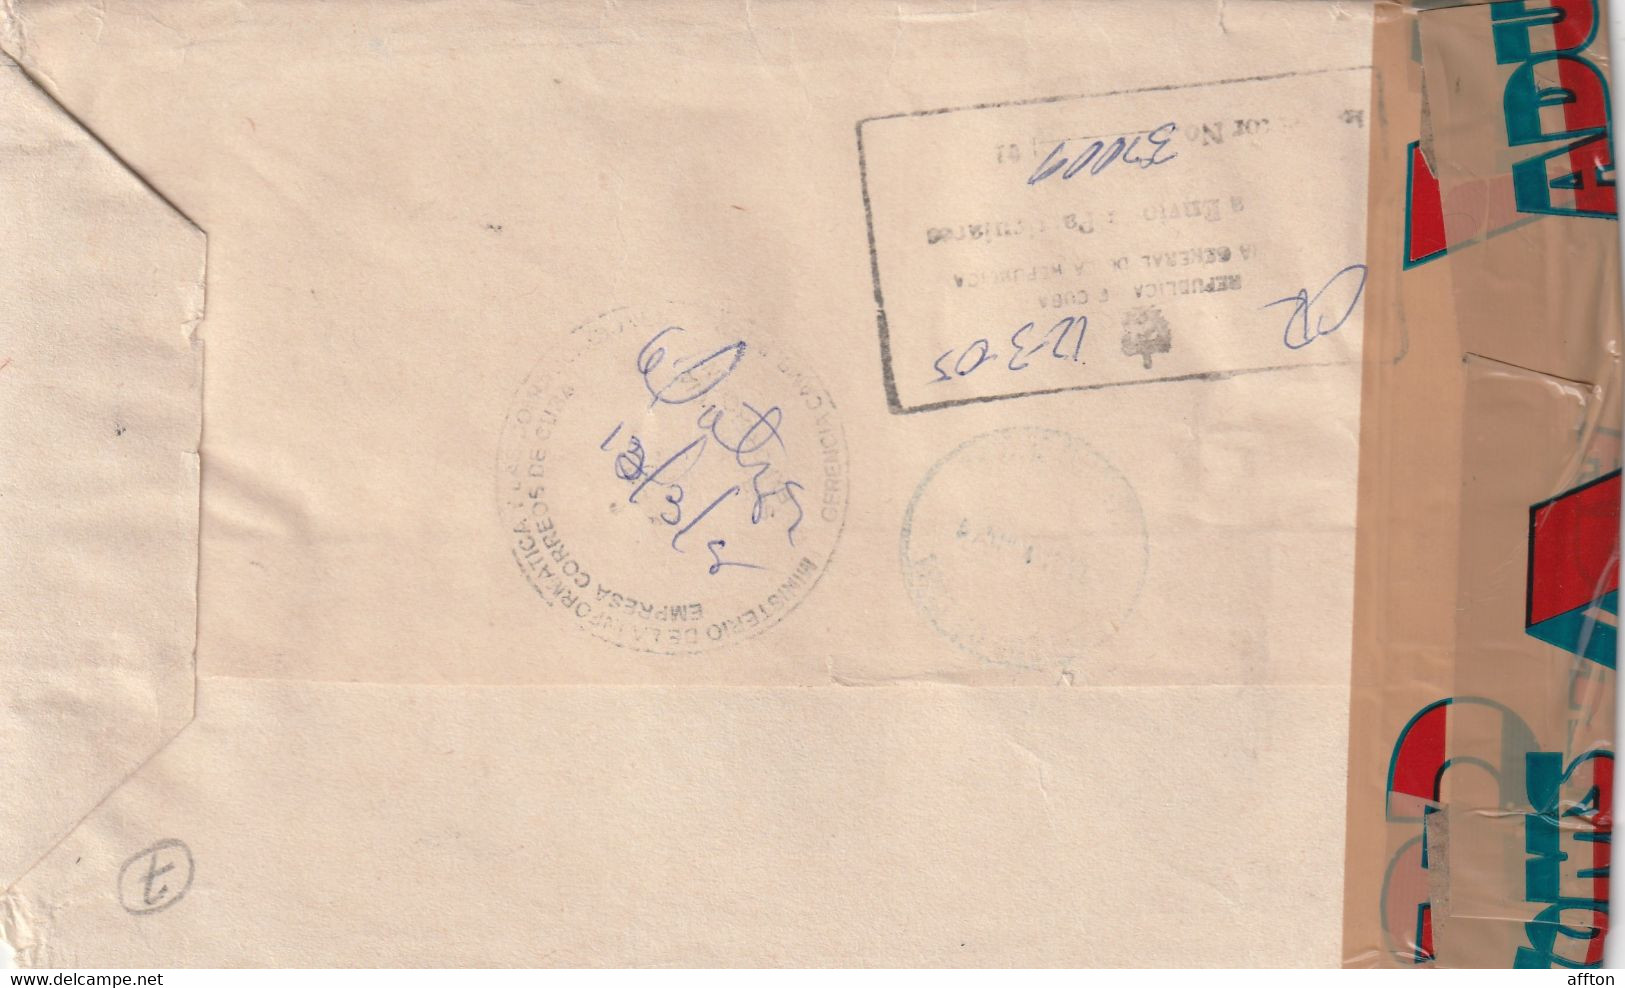 Cuba Cover Mailed - Lettres & Documents